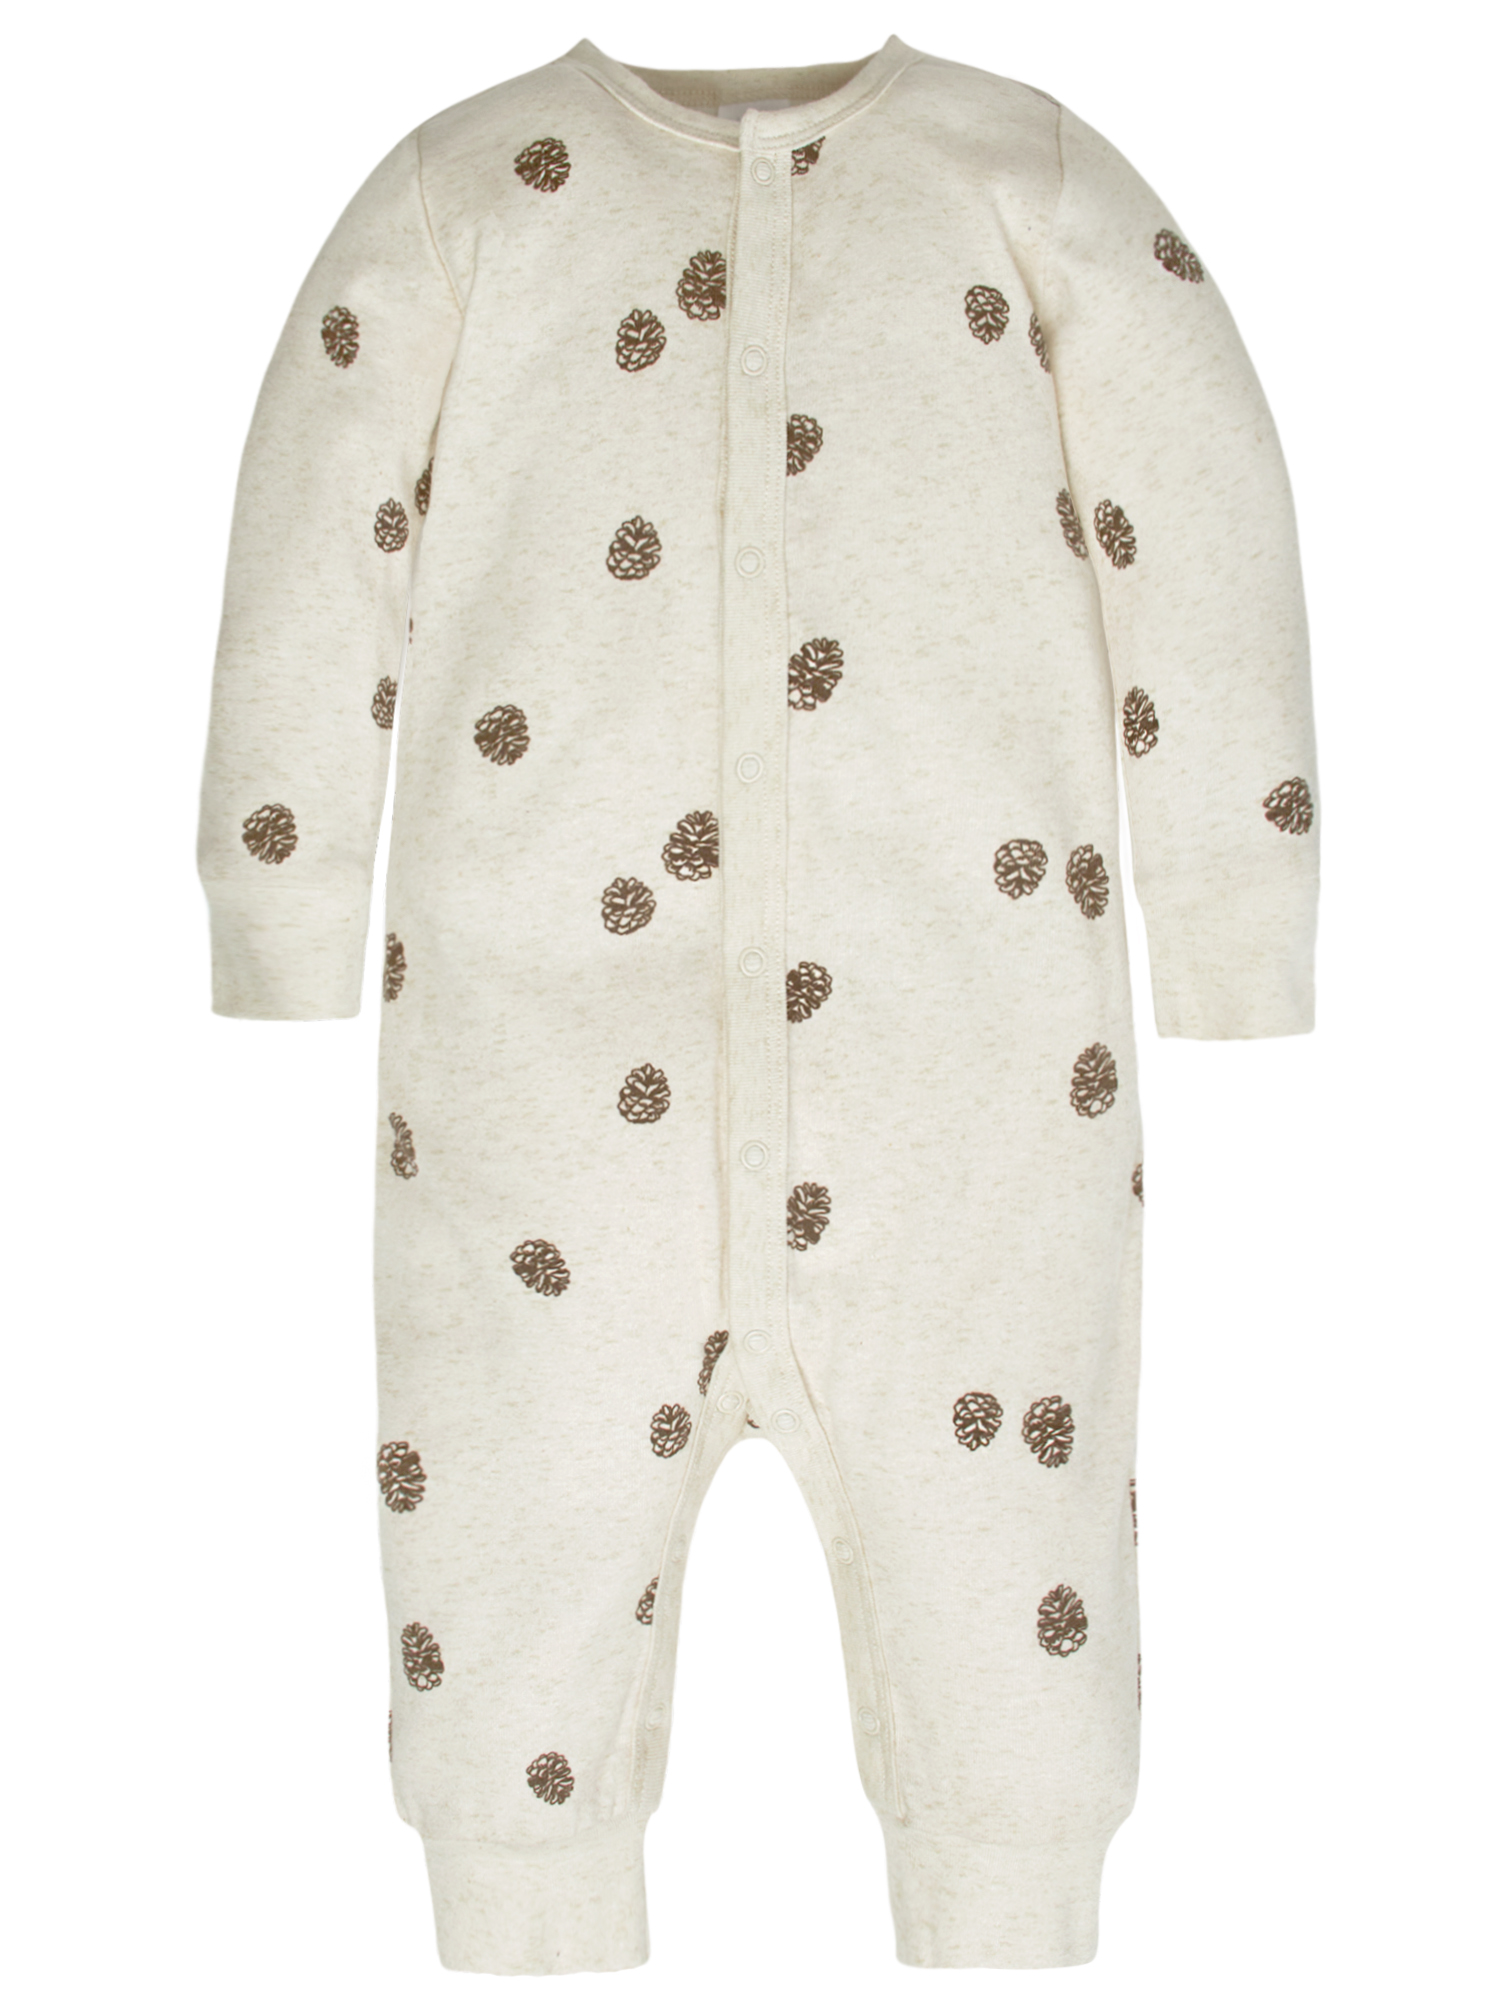 Modern Moments by Gerber Baby Boy Coveralls, 2-Pack (Newborn - 12M) - image 2 of 8